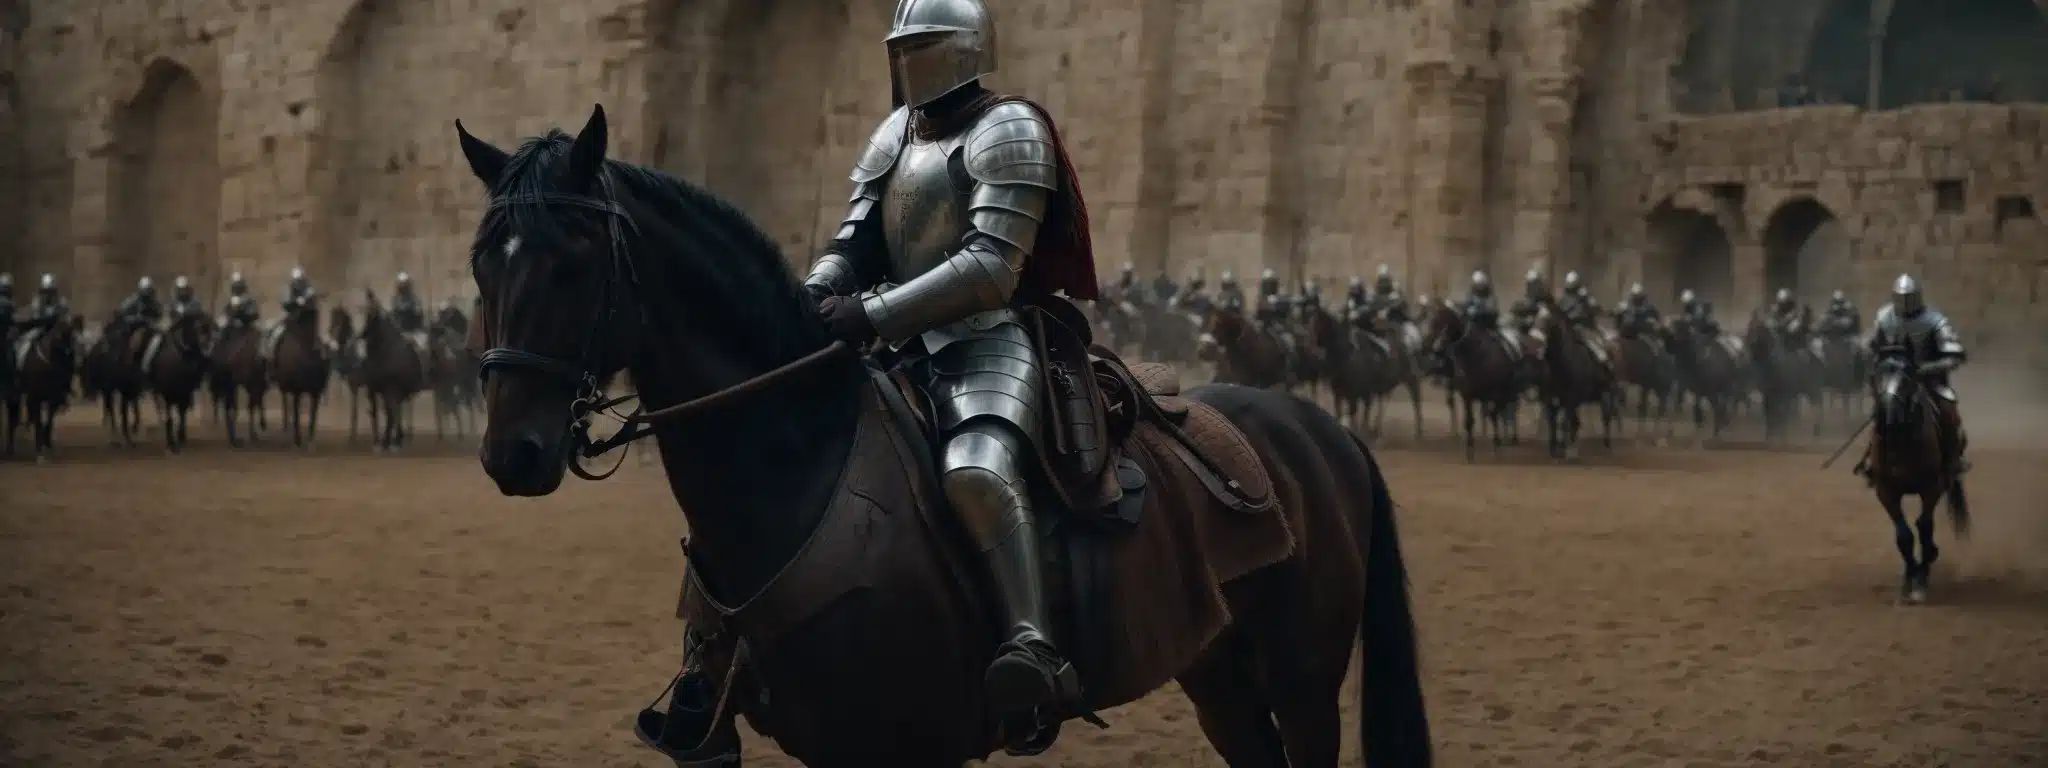 A Knight On Horseback With A Raised Lance Preparing To Charge In An Ancient Arena.